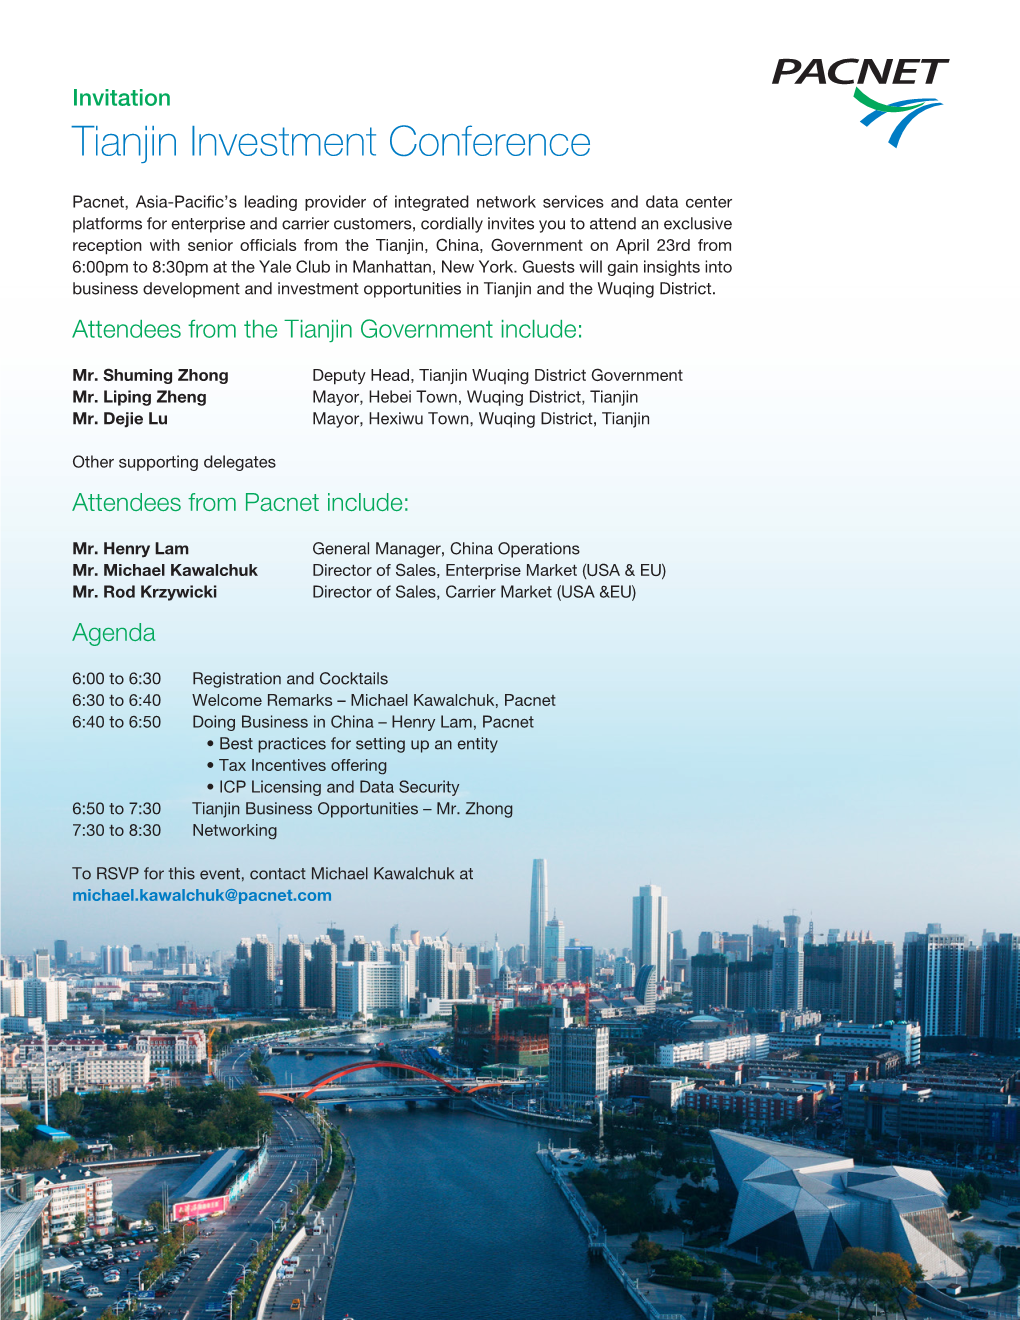 Tianjin Investment Conference